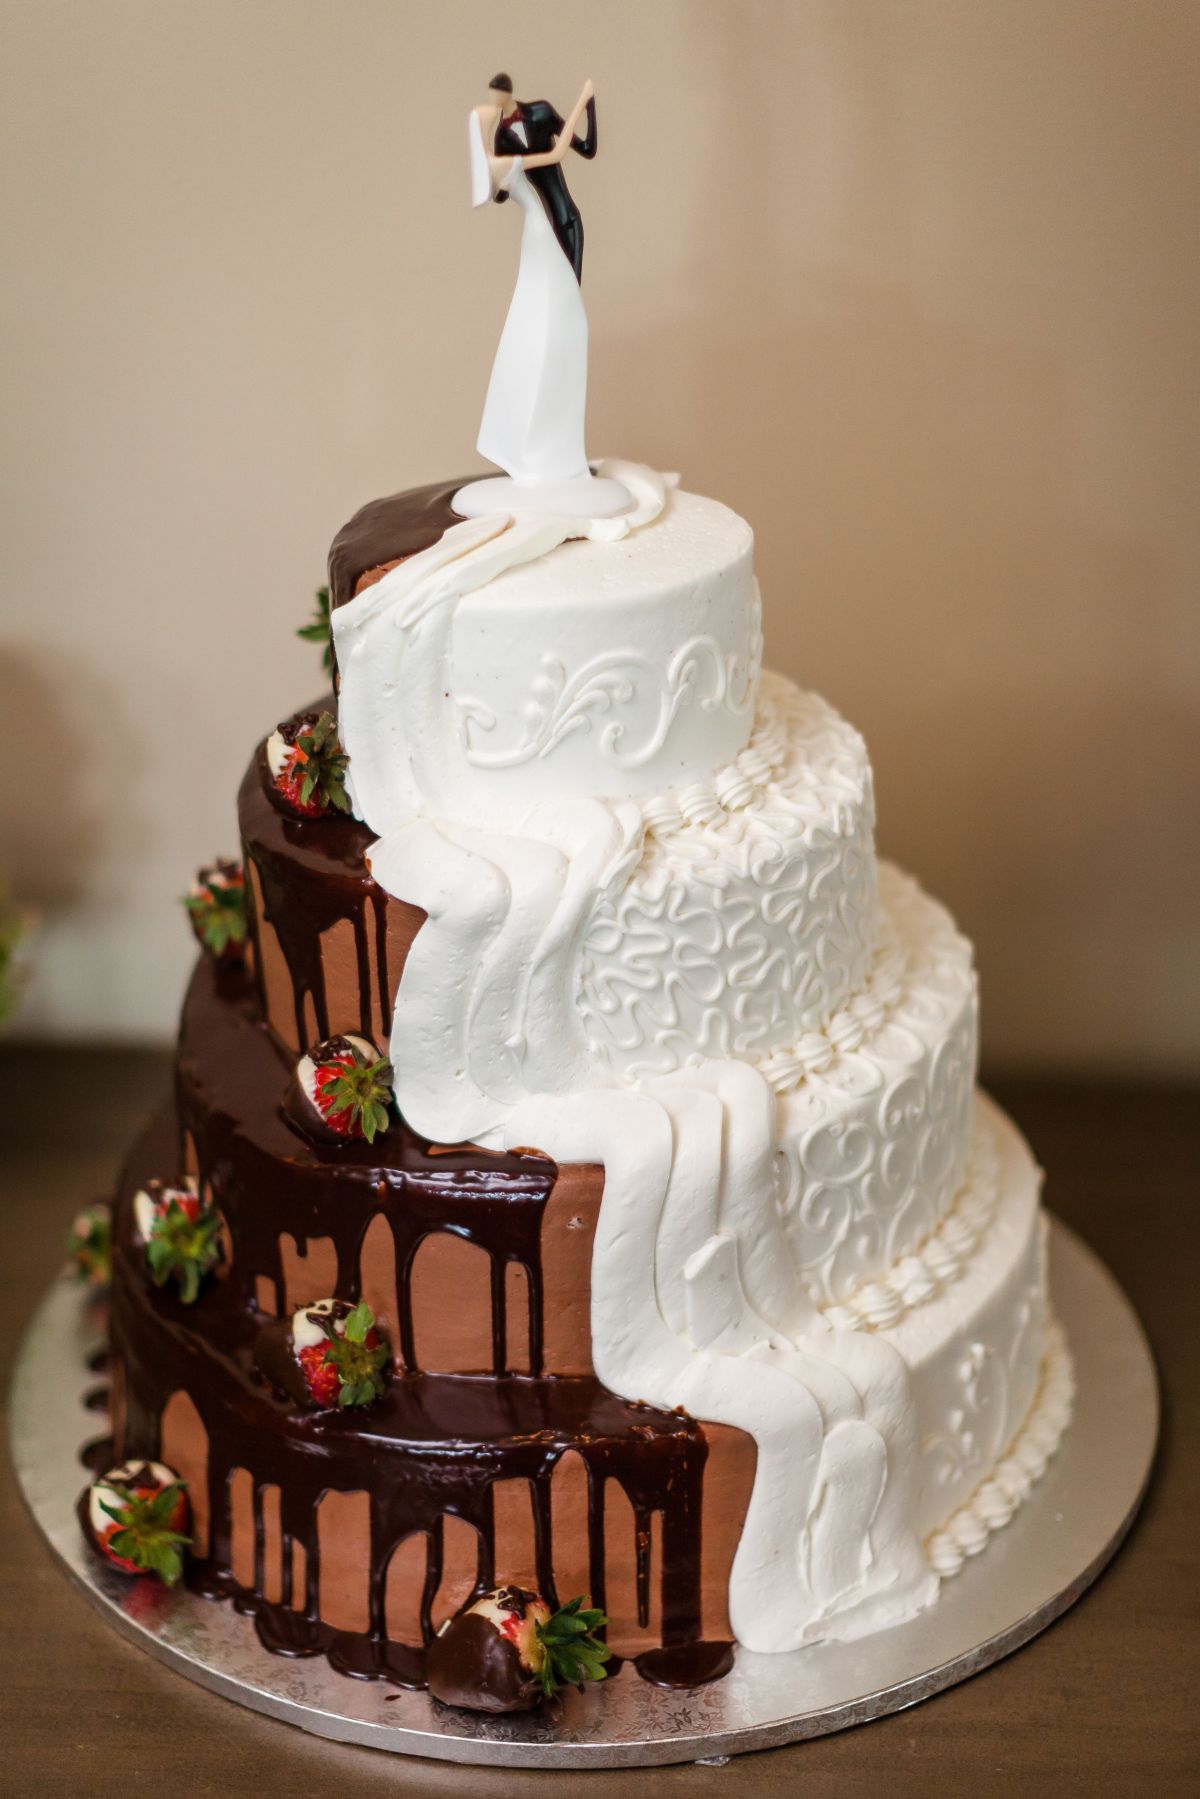 Combined Chocolate and Vanilla Bride and Groom's Cake